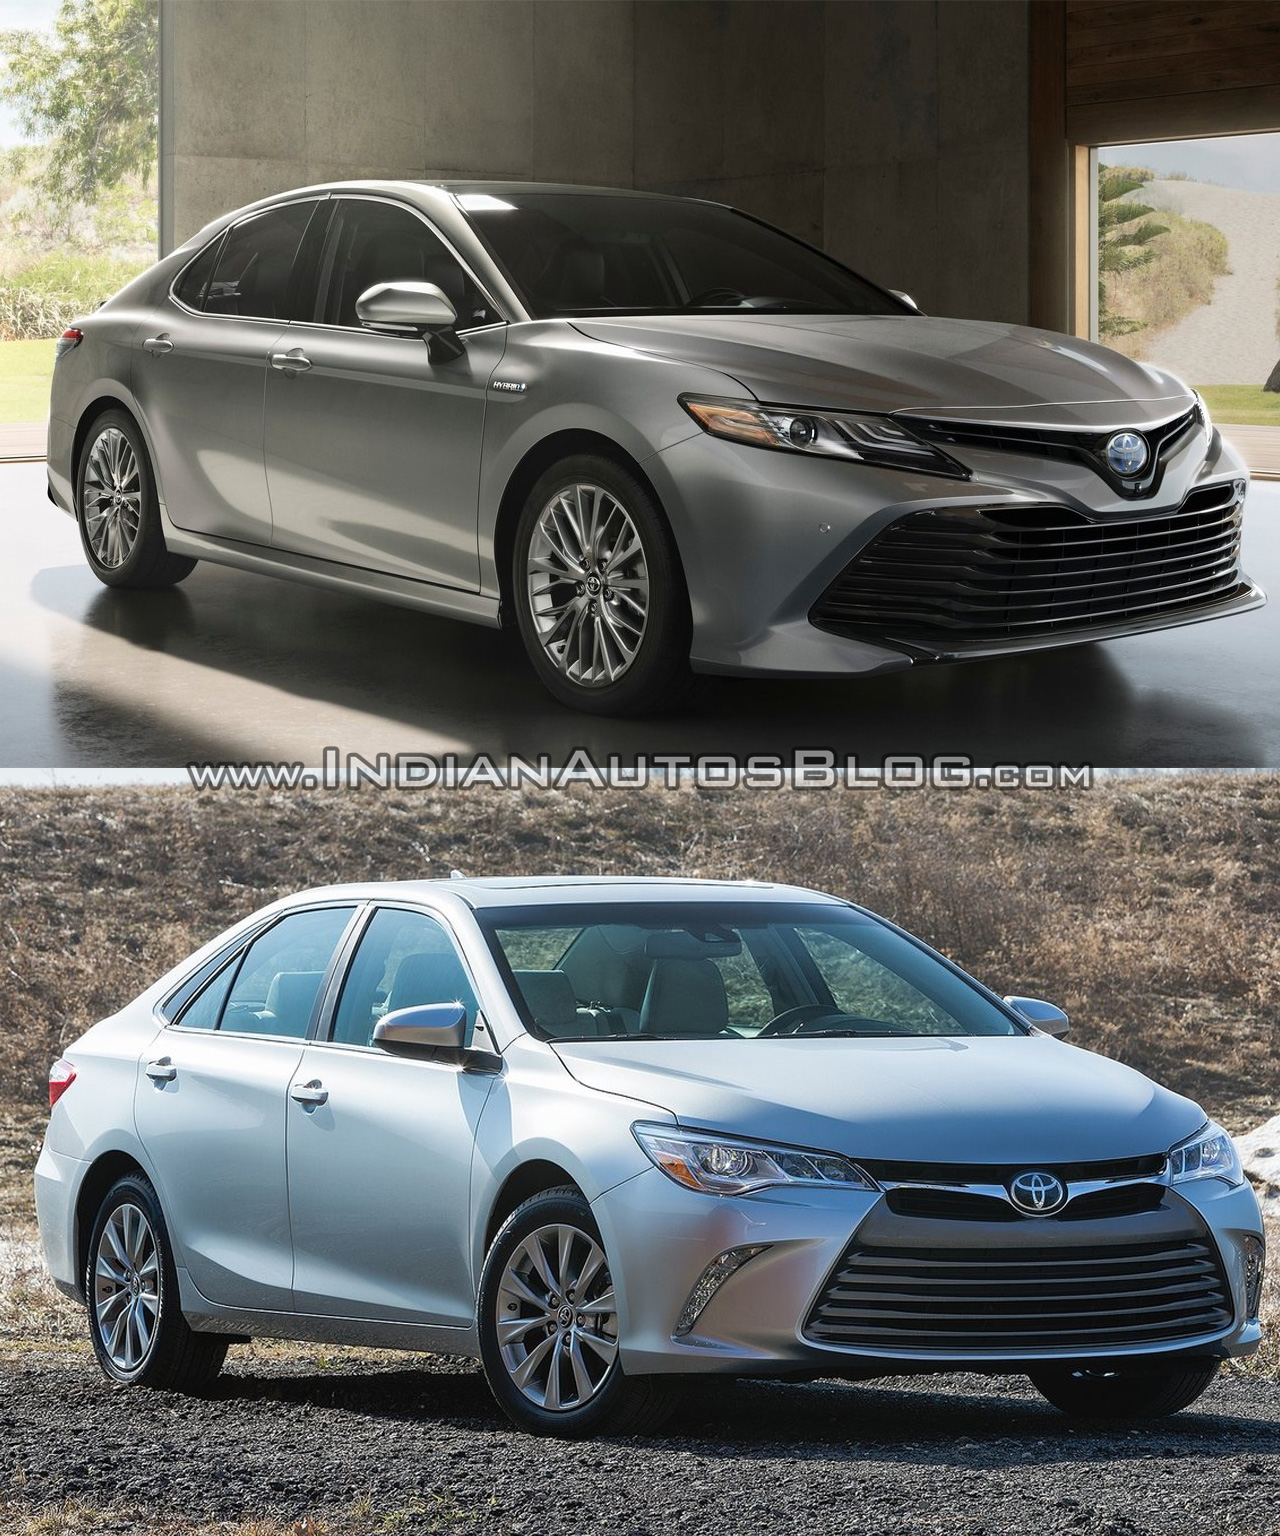 Toyota Camry Old Vs New: Major Differences